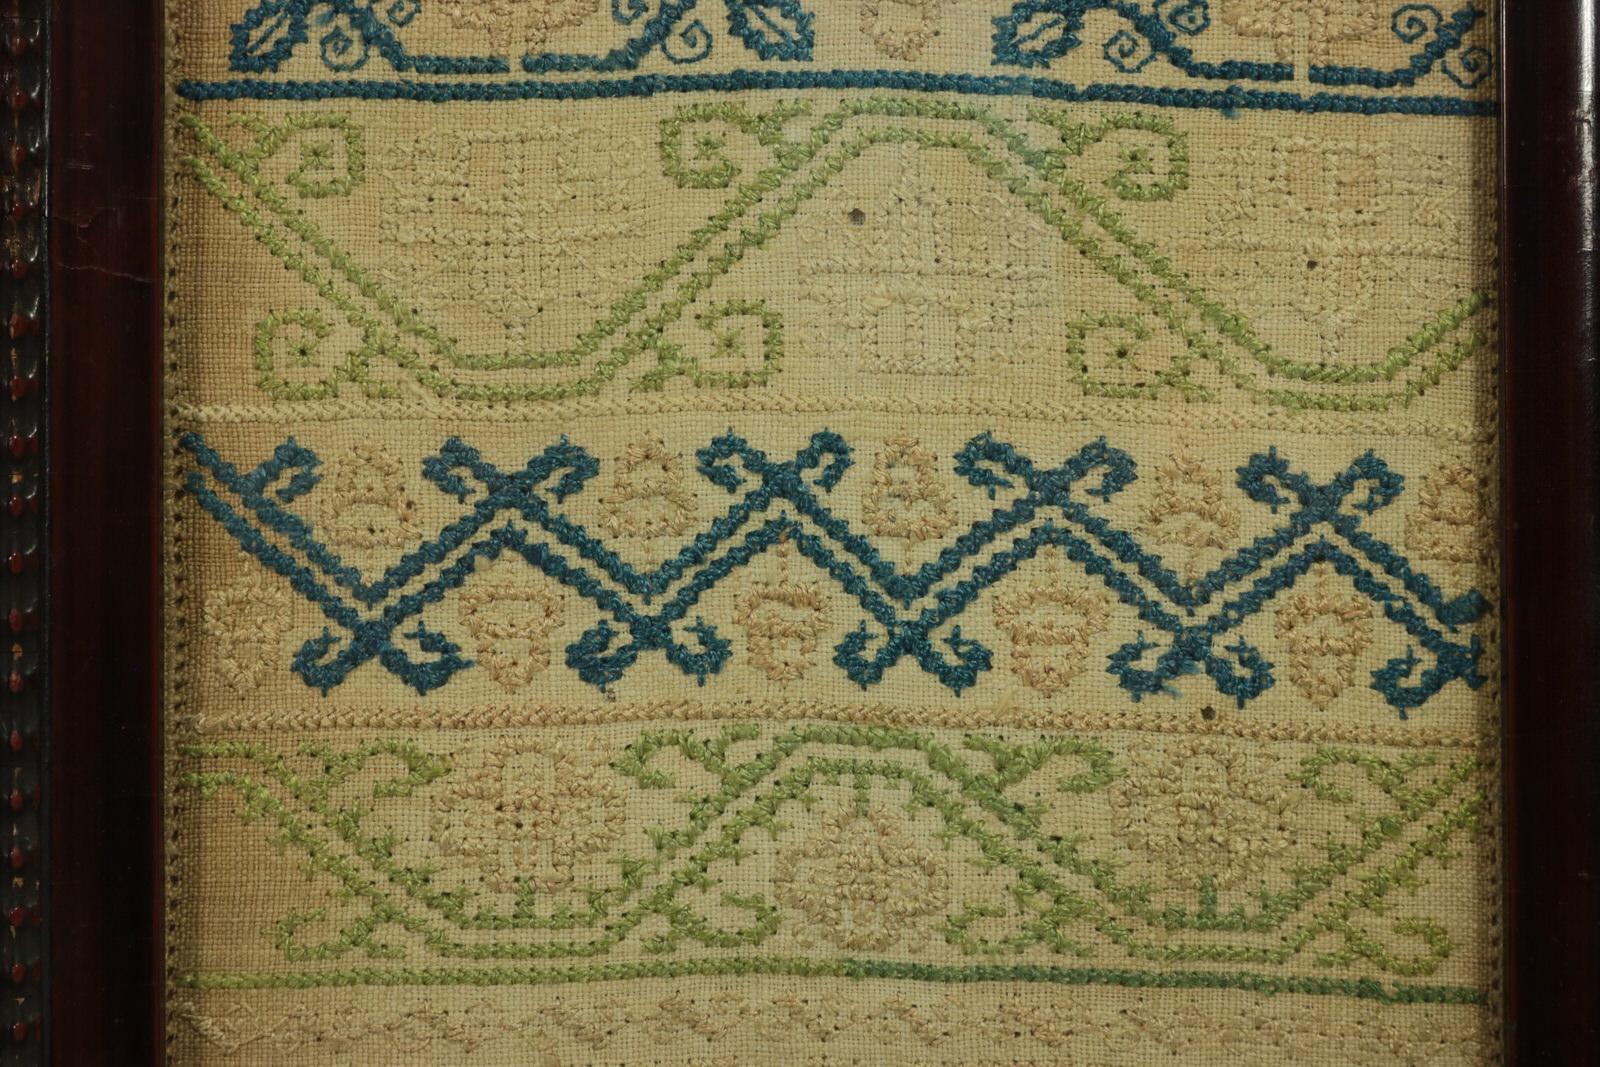 Mid-17th Century Charles I Band Sampler, 1649, by HW Aged 8